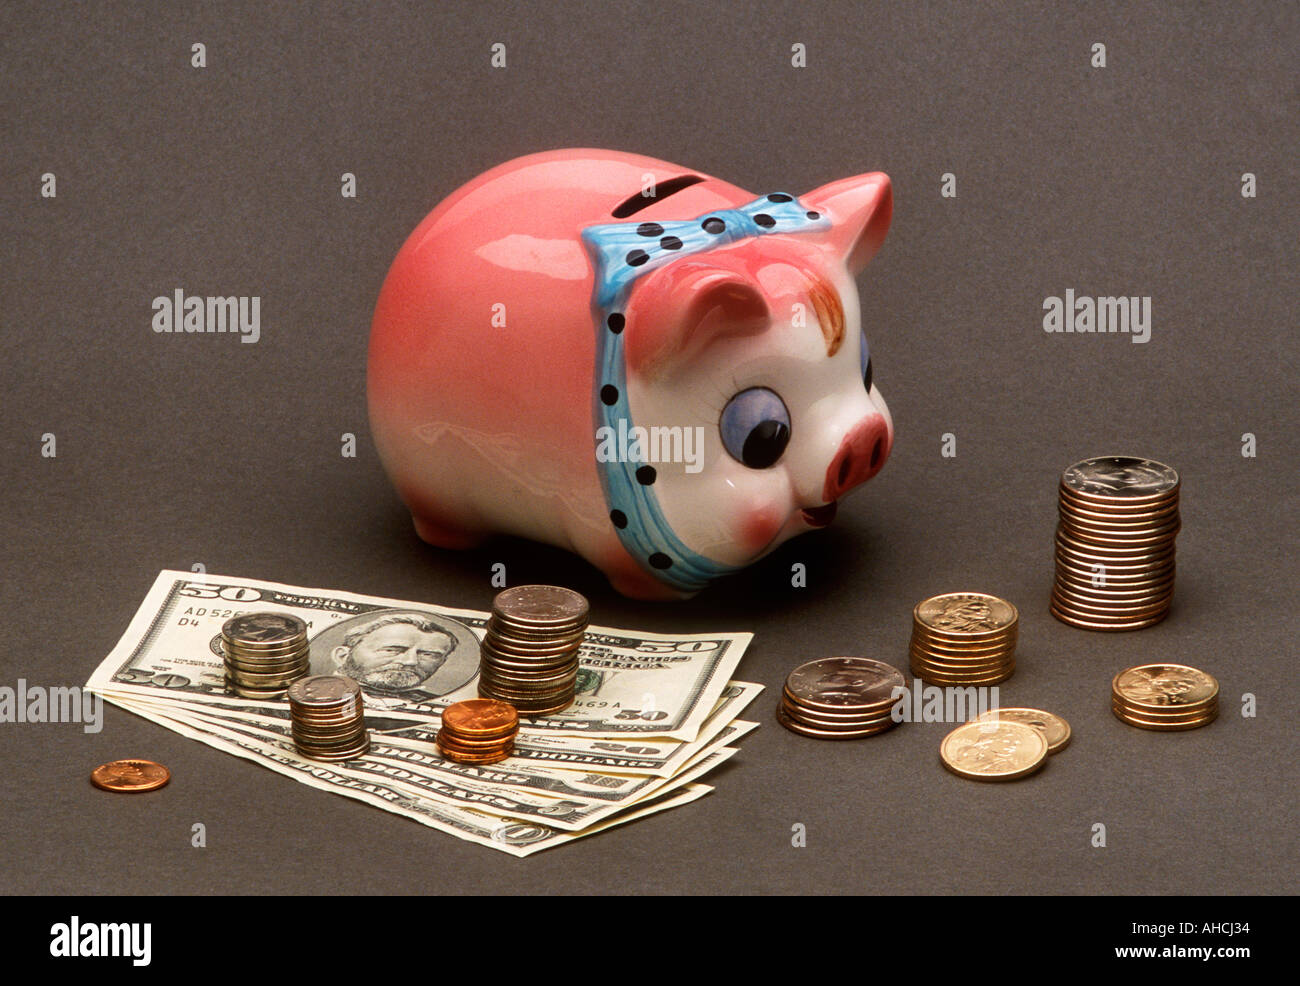 American Currency Coins Piggy Bank Stock Photo